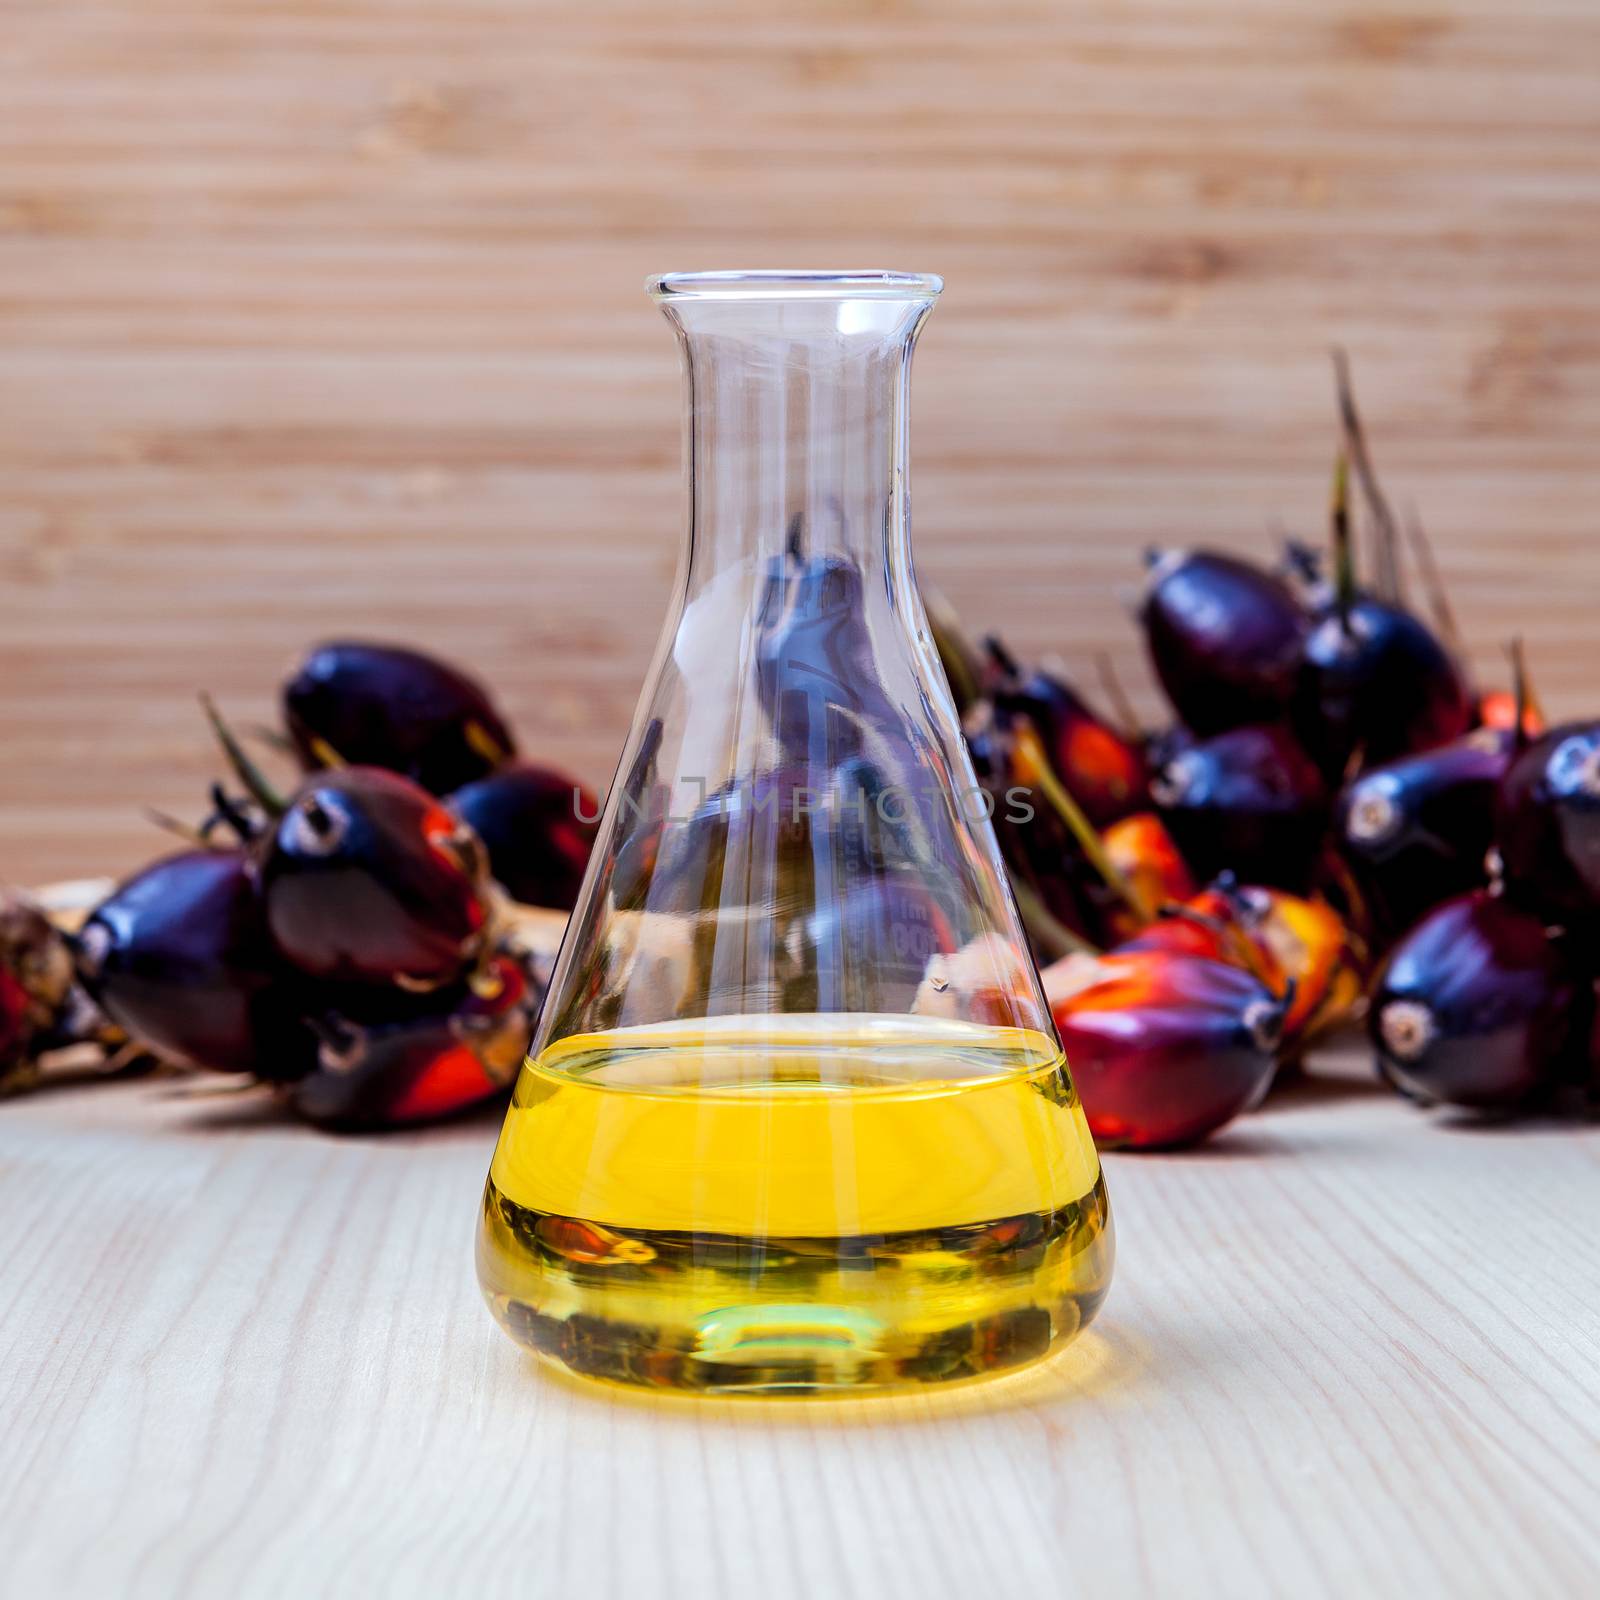 Alternate fuel , bio diesel in laboratory glass and red palm fruits set up on wooden background.